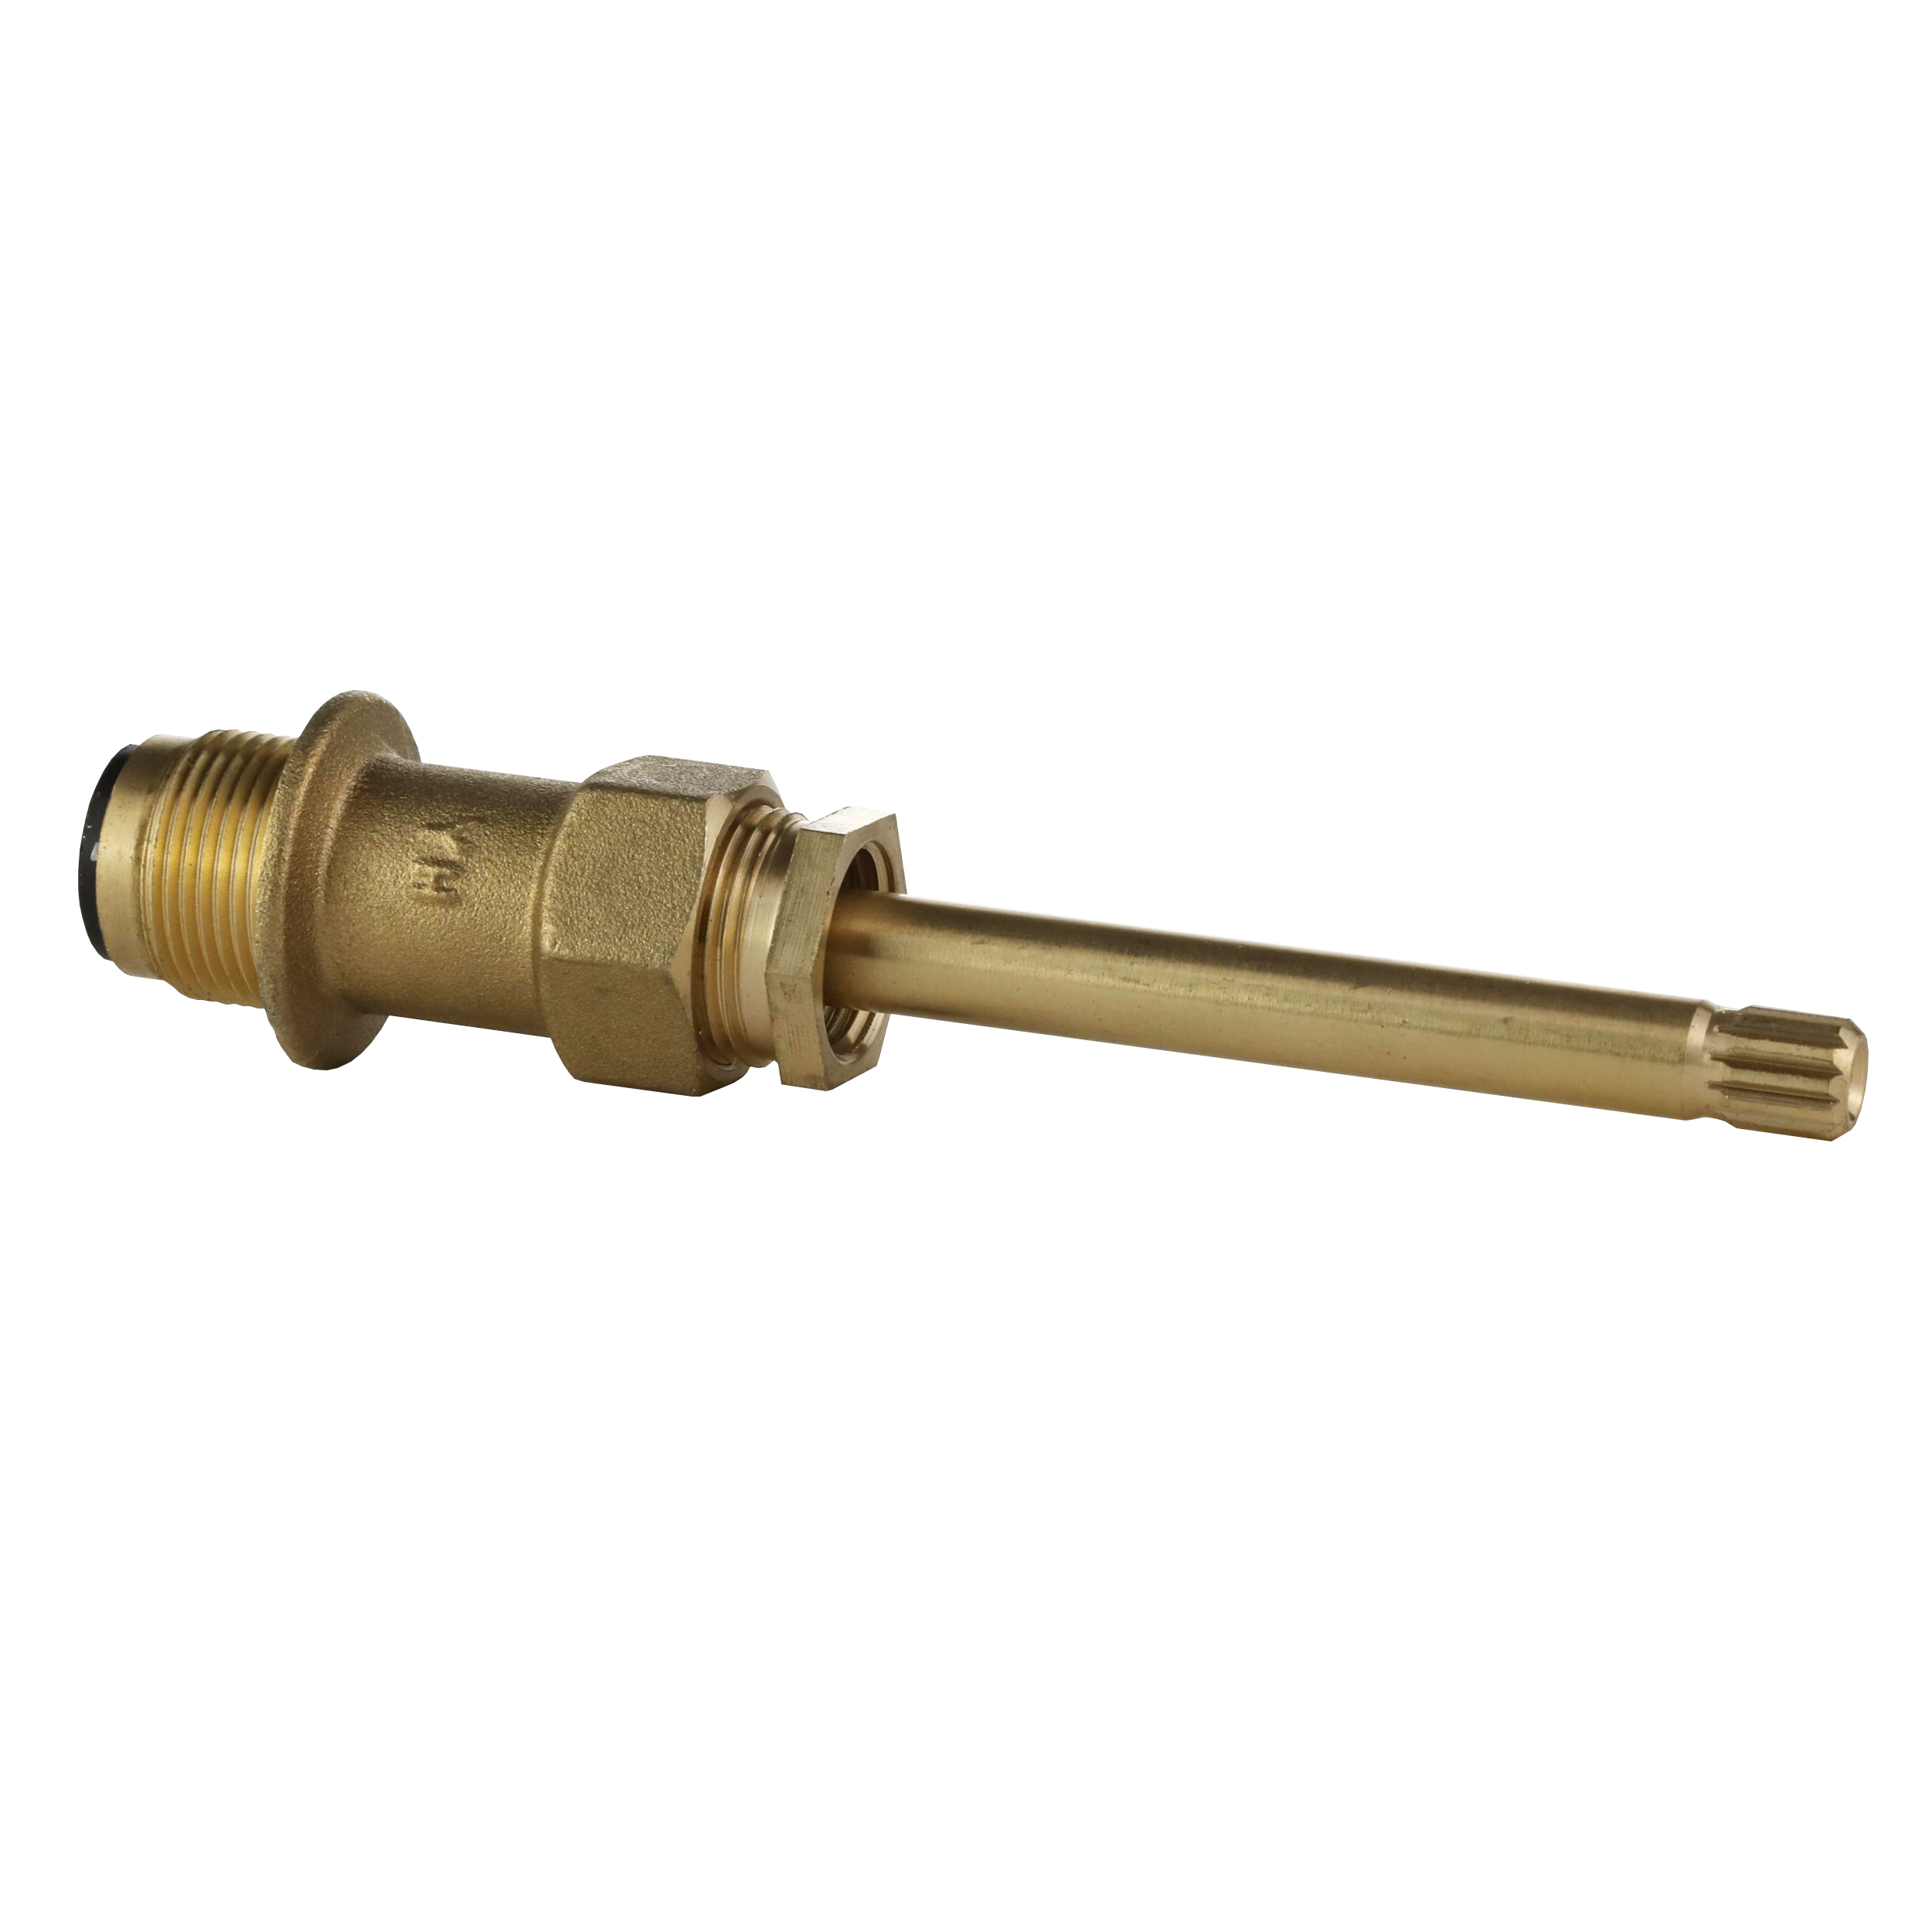 6B-7C Stem Extension for Price Pfister Faucets - Danco